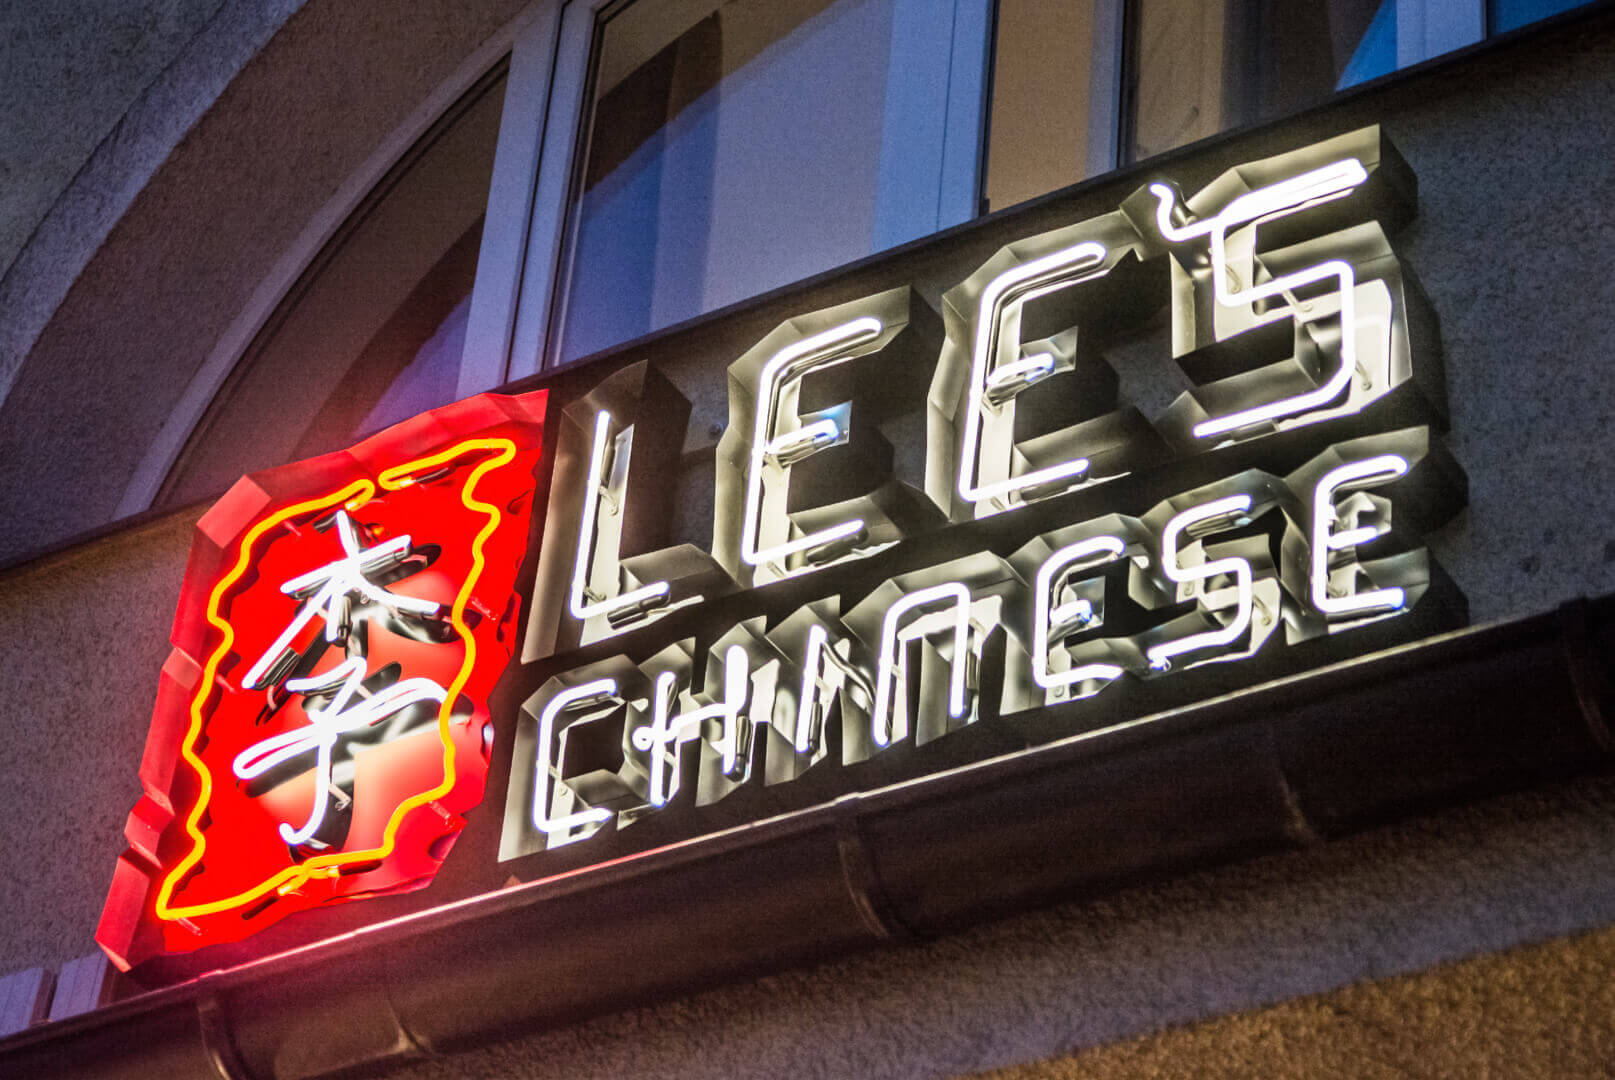 Lees Chines - neon-lees-chinese-neon-above-entry-to-the-restaurant-neon-on-the-wall-neon-on-the-outs-neon-in-melate-rusting-logo-signo-chinese-letter-signs-neon-letter-sub-lighted-china-restuarant-gdansk